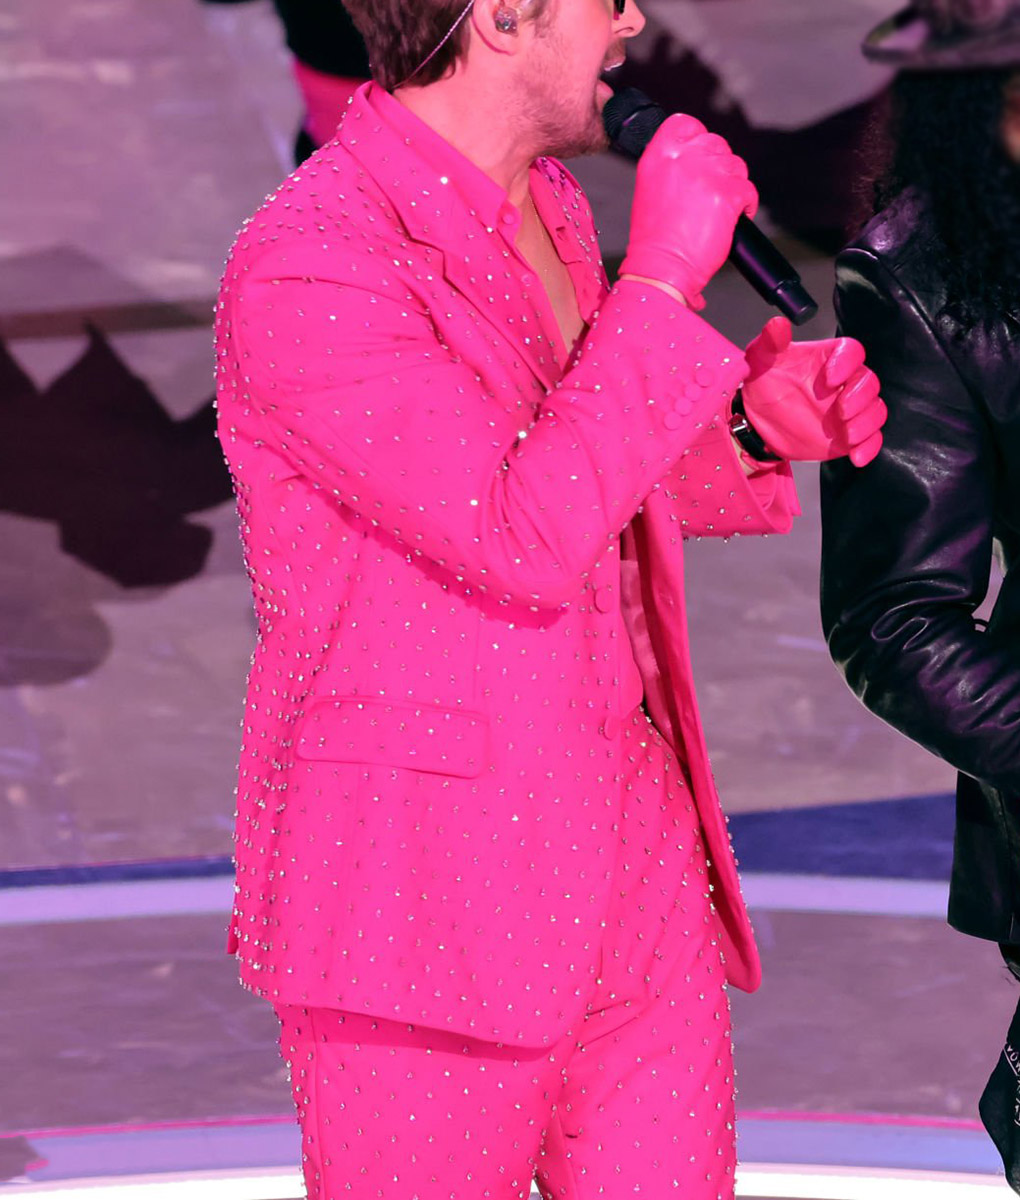 Ryan Gosling Oscars Bedazzled Pink Suit (3)